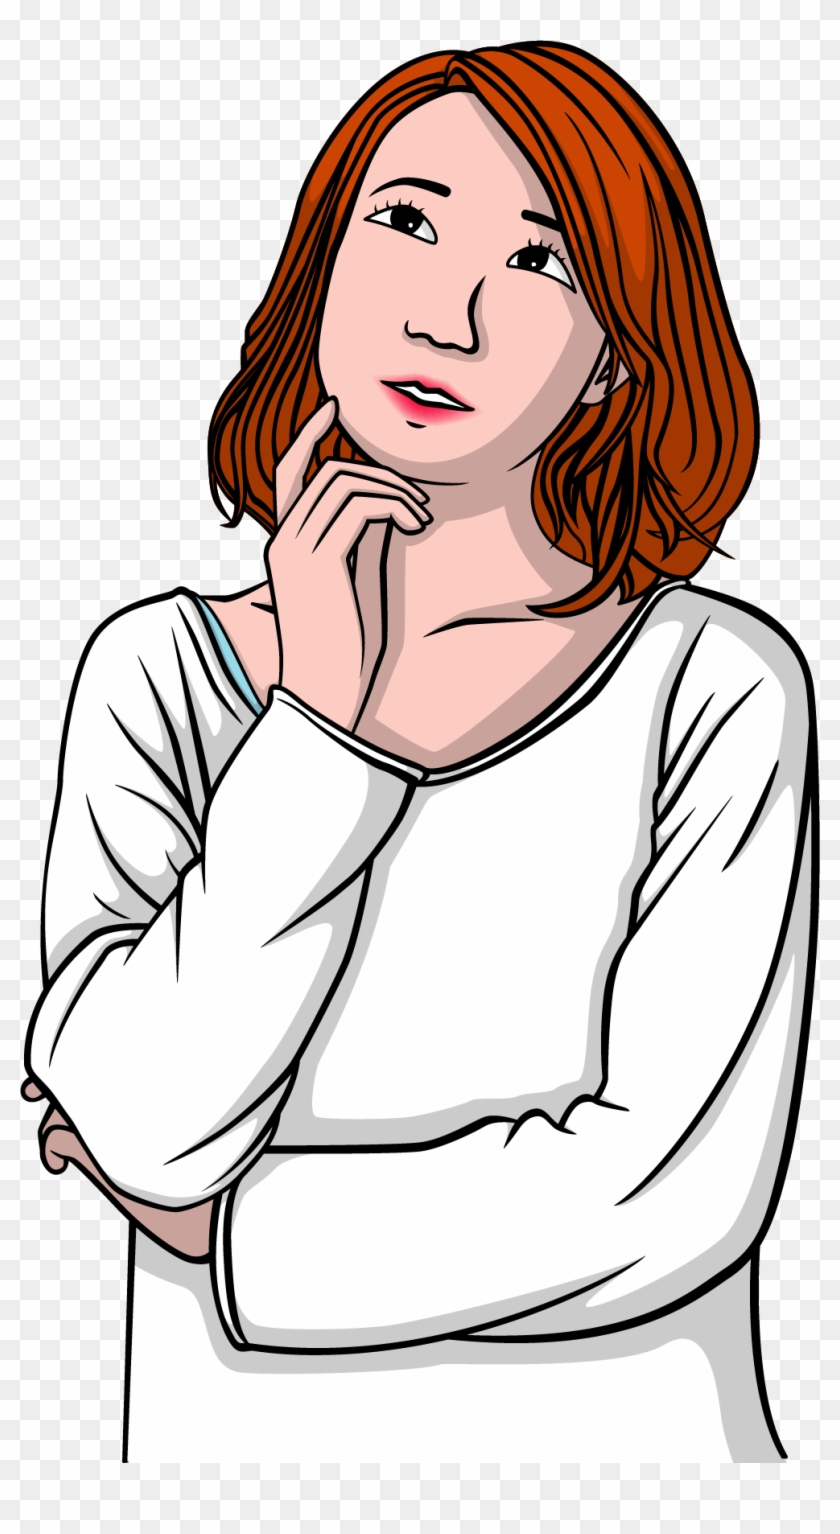 Woman Thought Girl Clip Art Lady Thinking Clip Art Png Download Pikpng